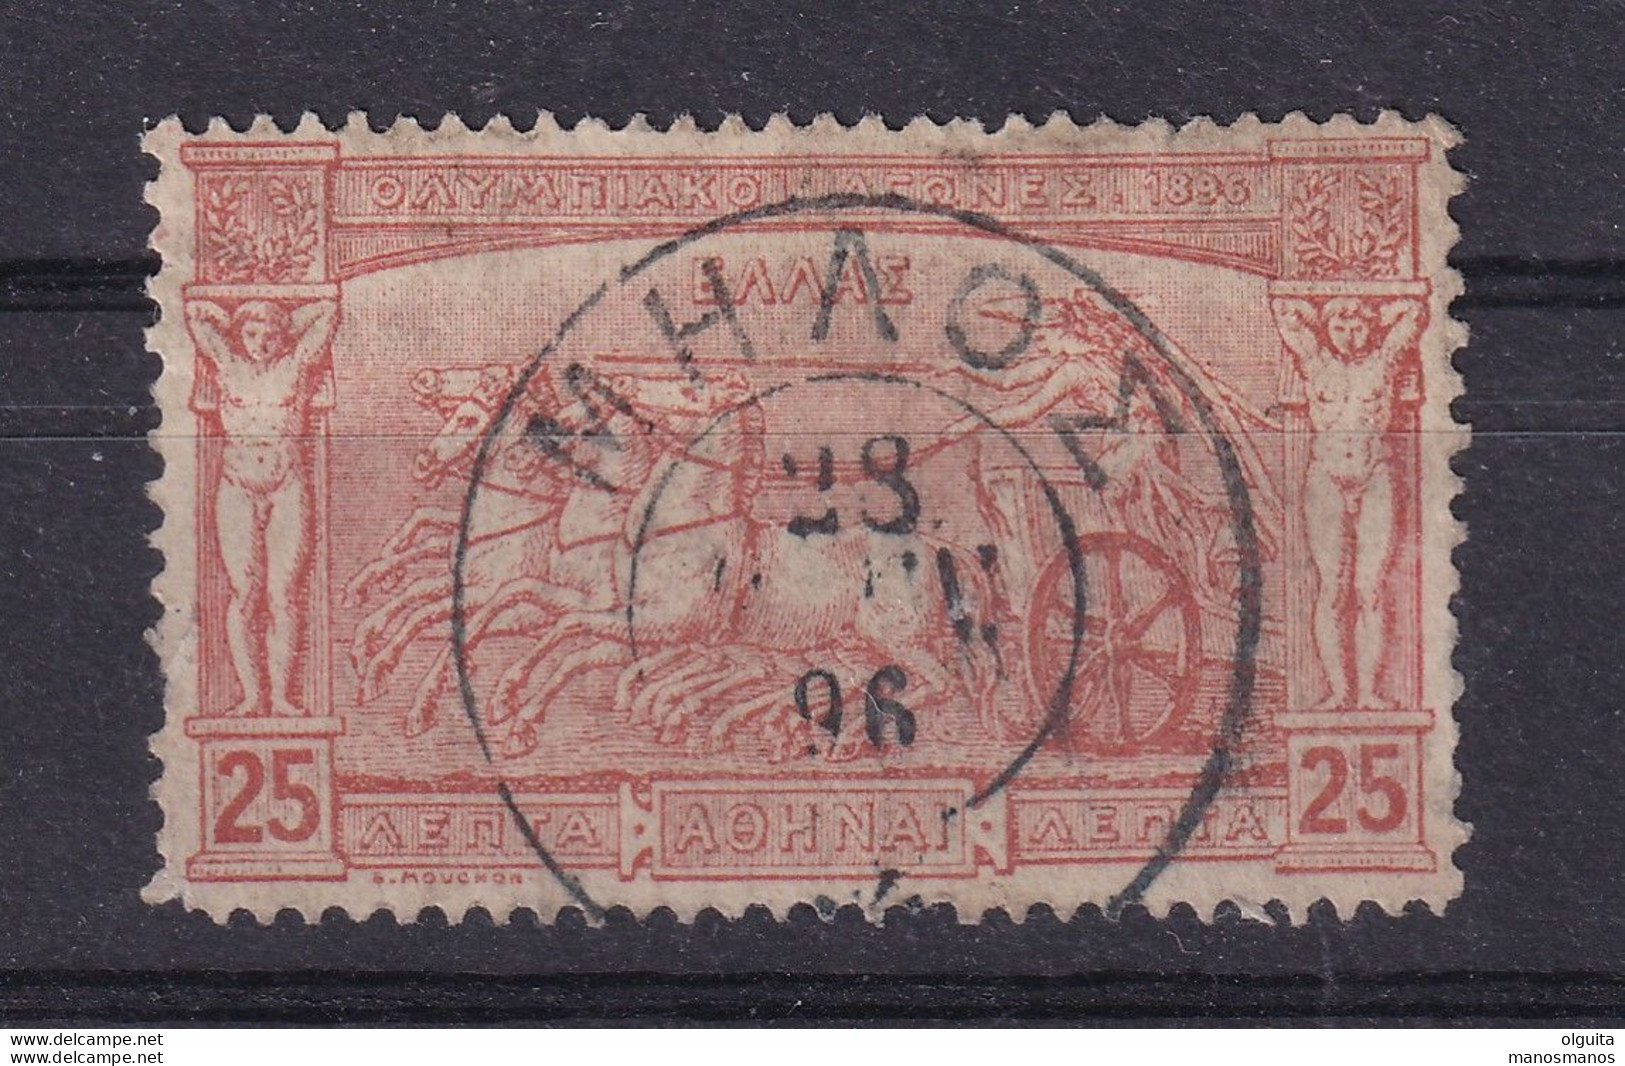 DDCC 389 - GREECE Olympic Games 1896 - Cancel Of Island MILOS 96 - Used Stamps